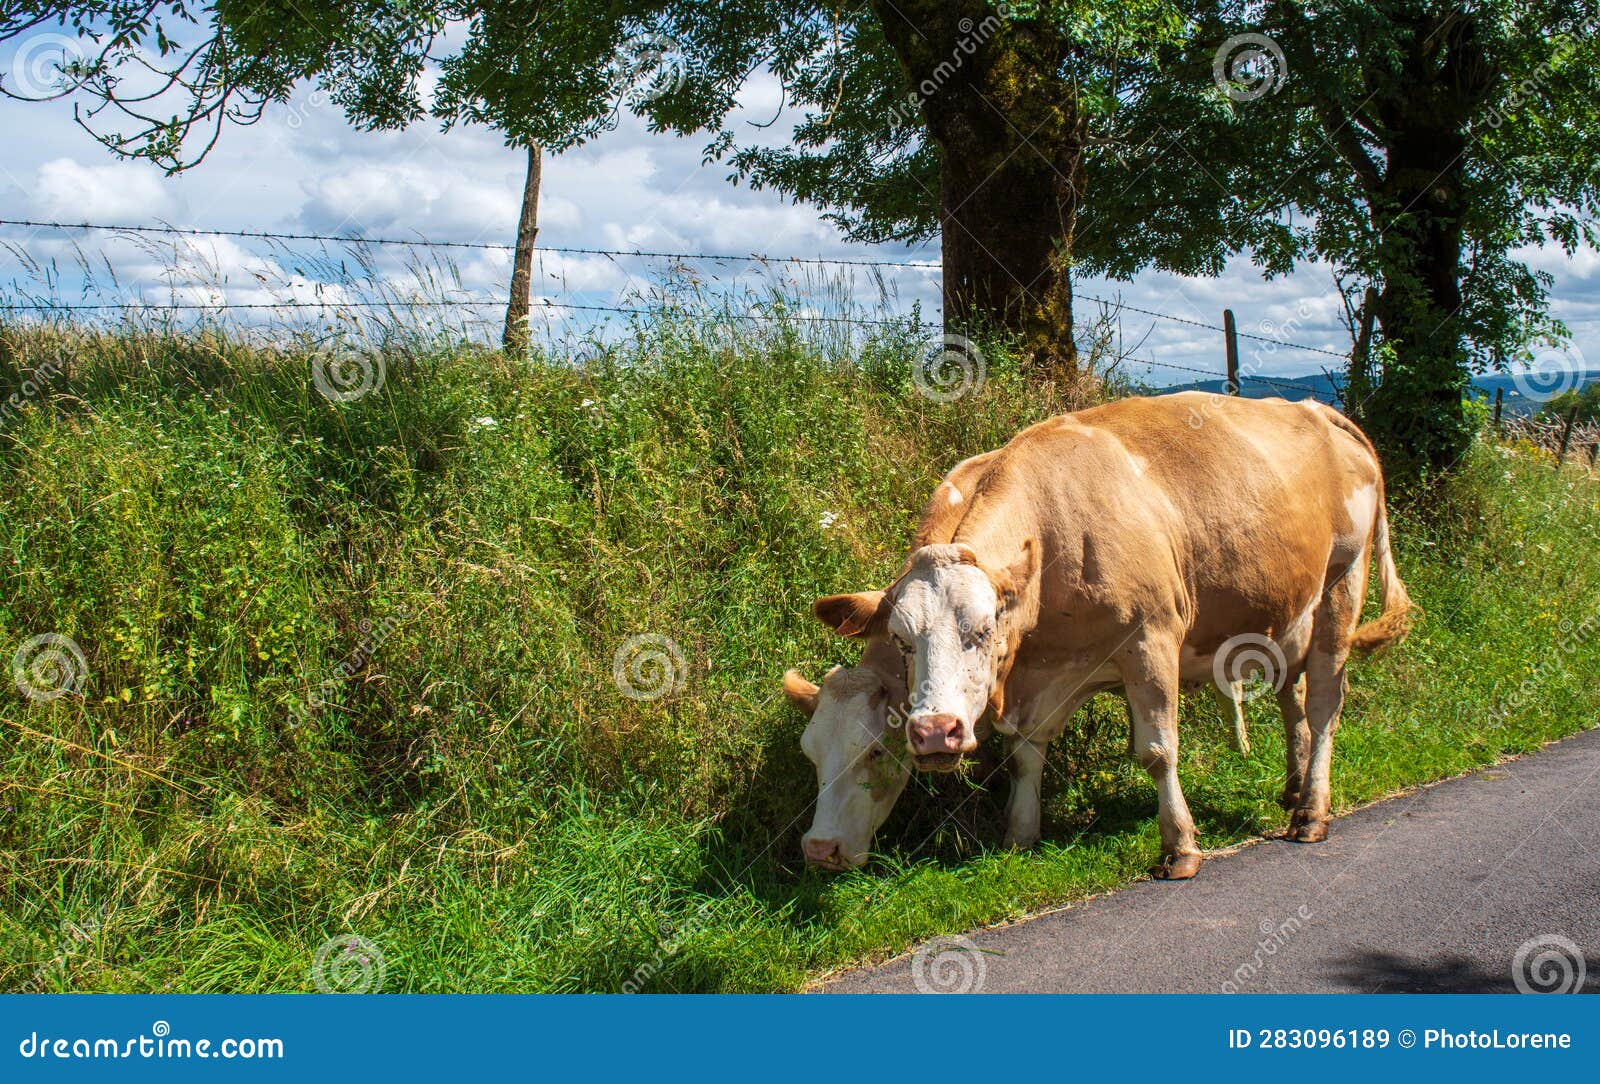 cows along the road in the aubrac region of southern france